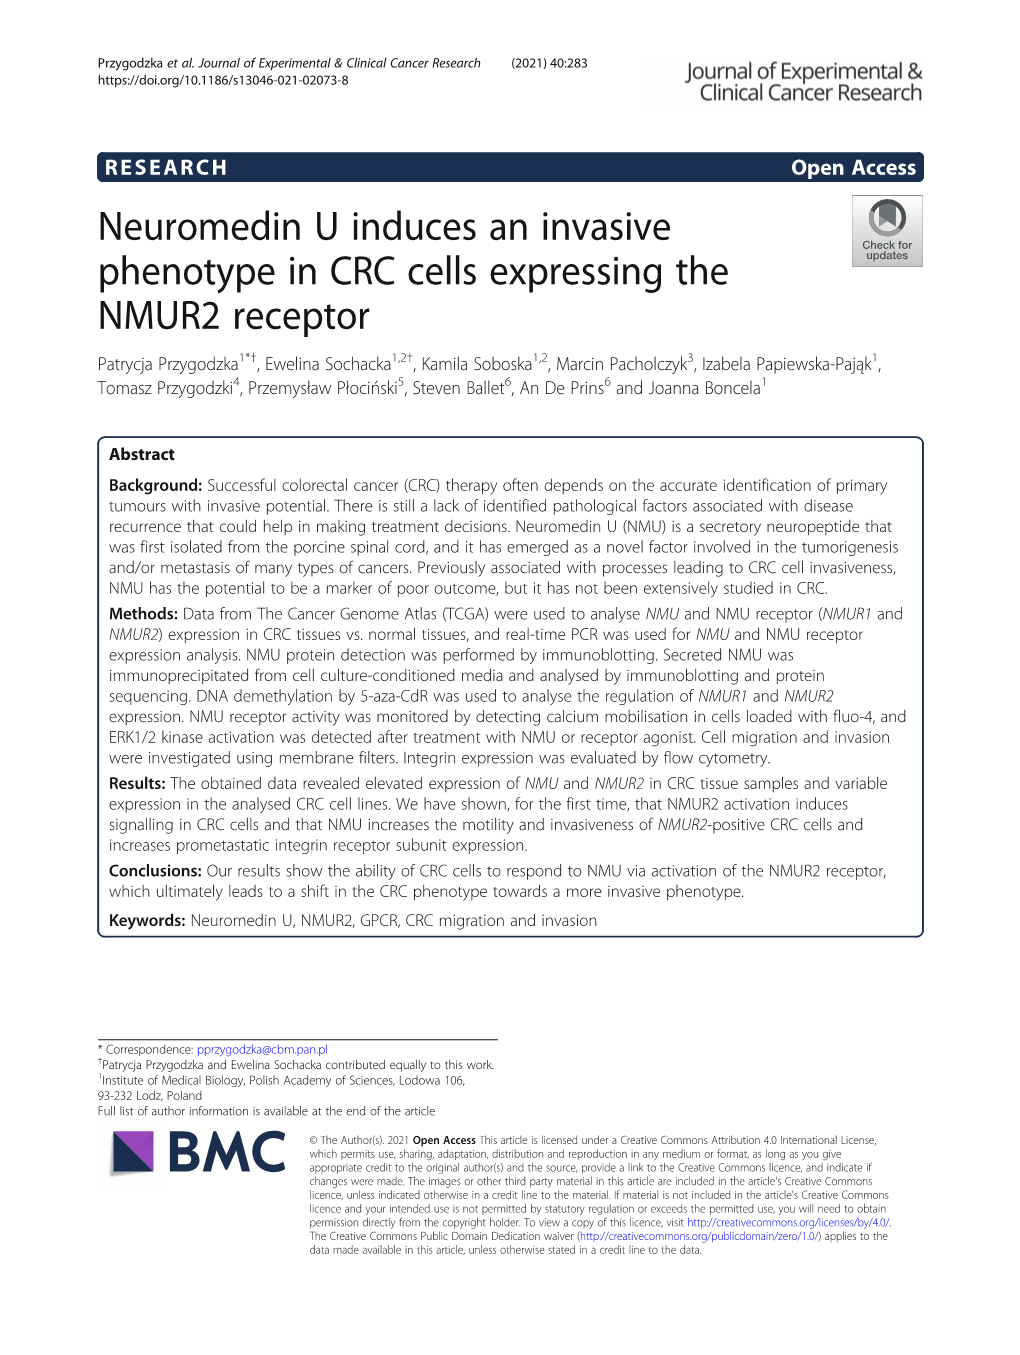 Neuromedin U Induces an Invasive Phenotype in CRC Cells Expressing the NMUR2 Receptor